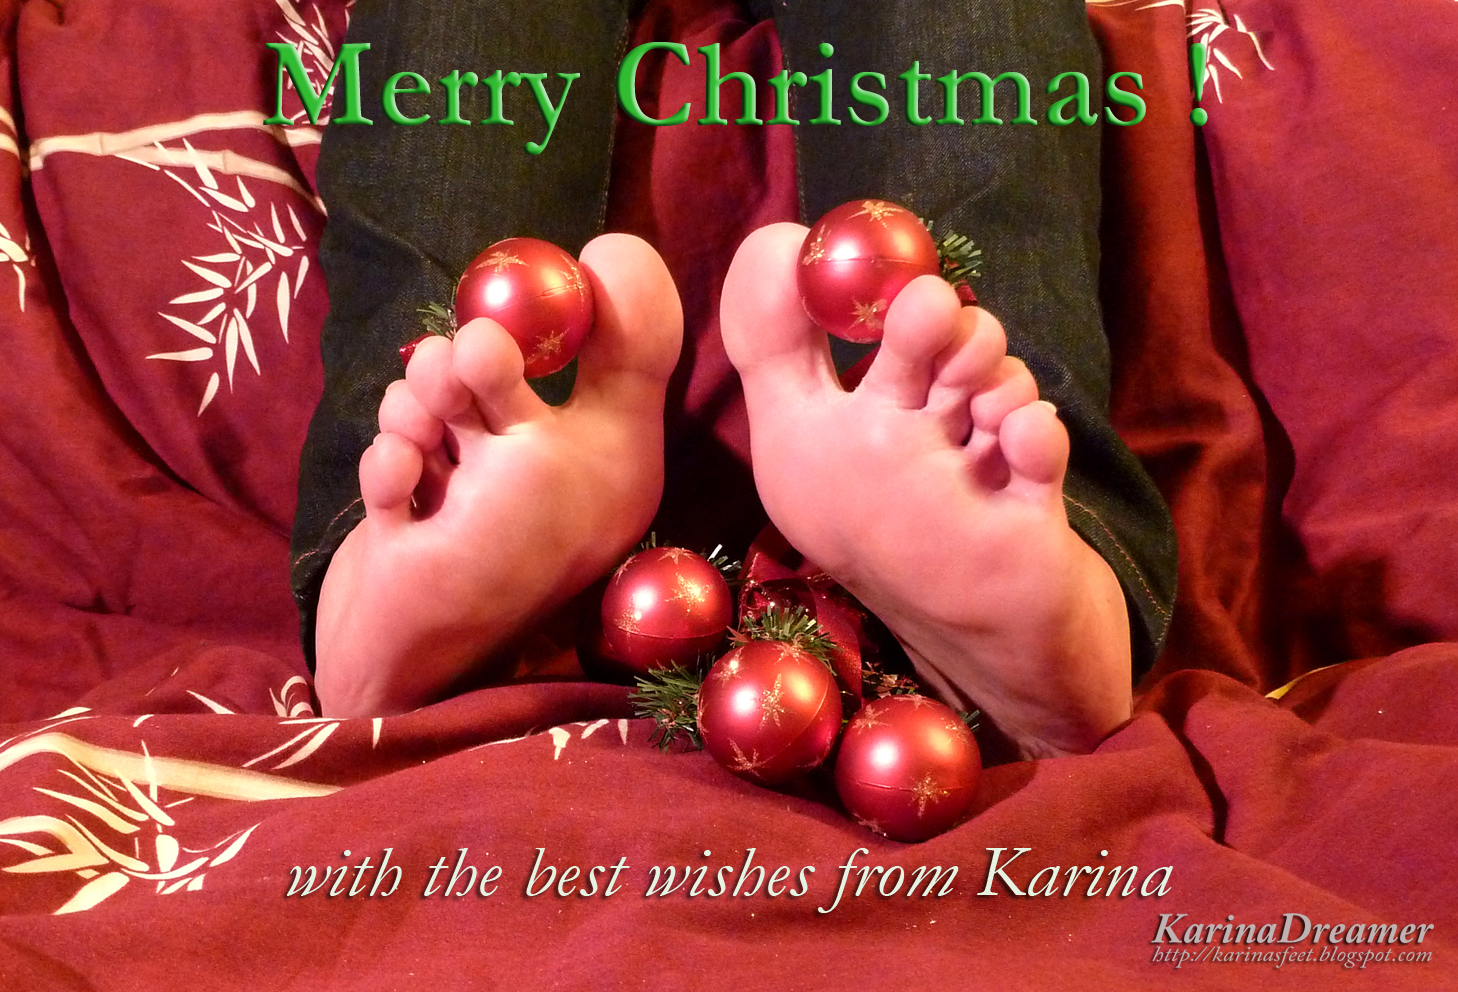 Christmas wishes from Karina.